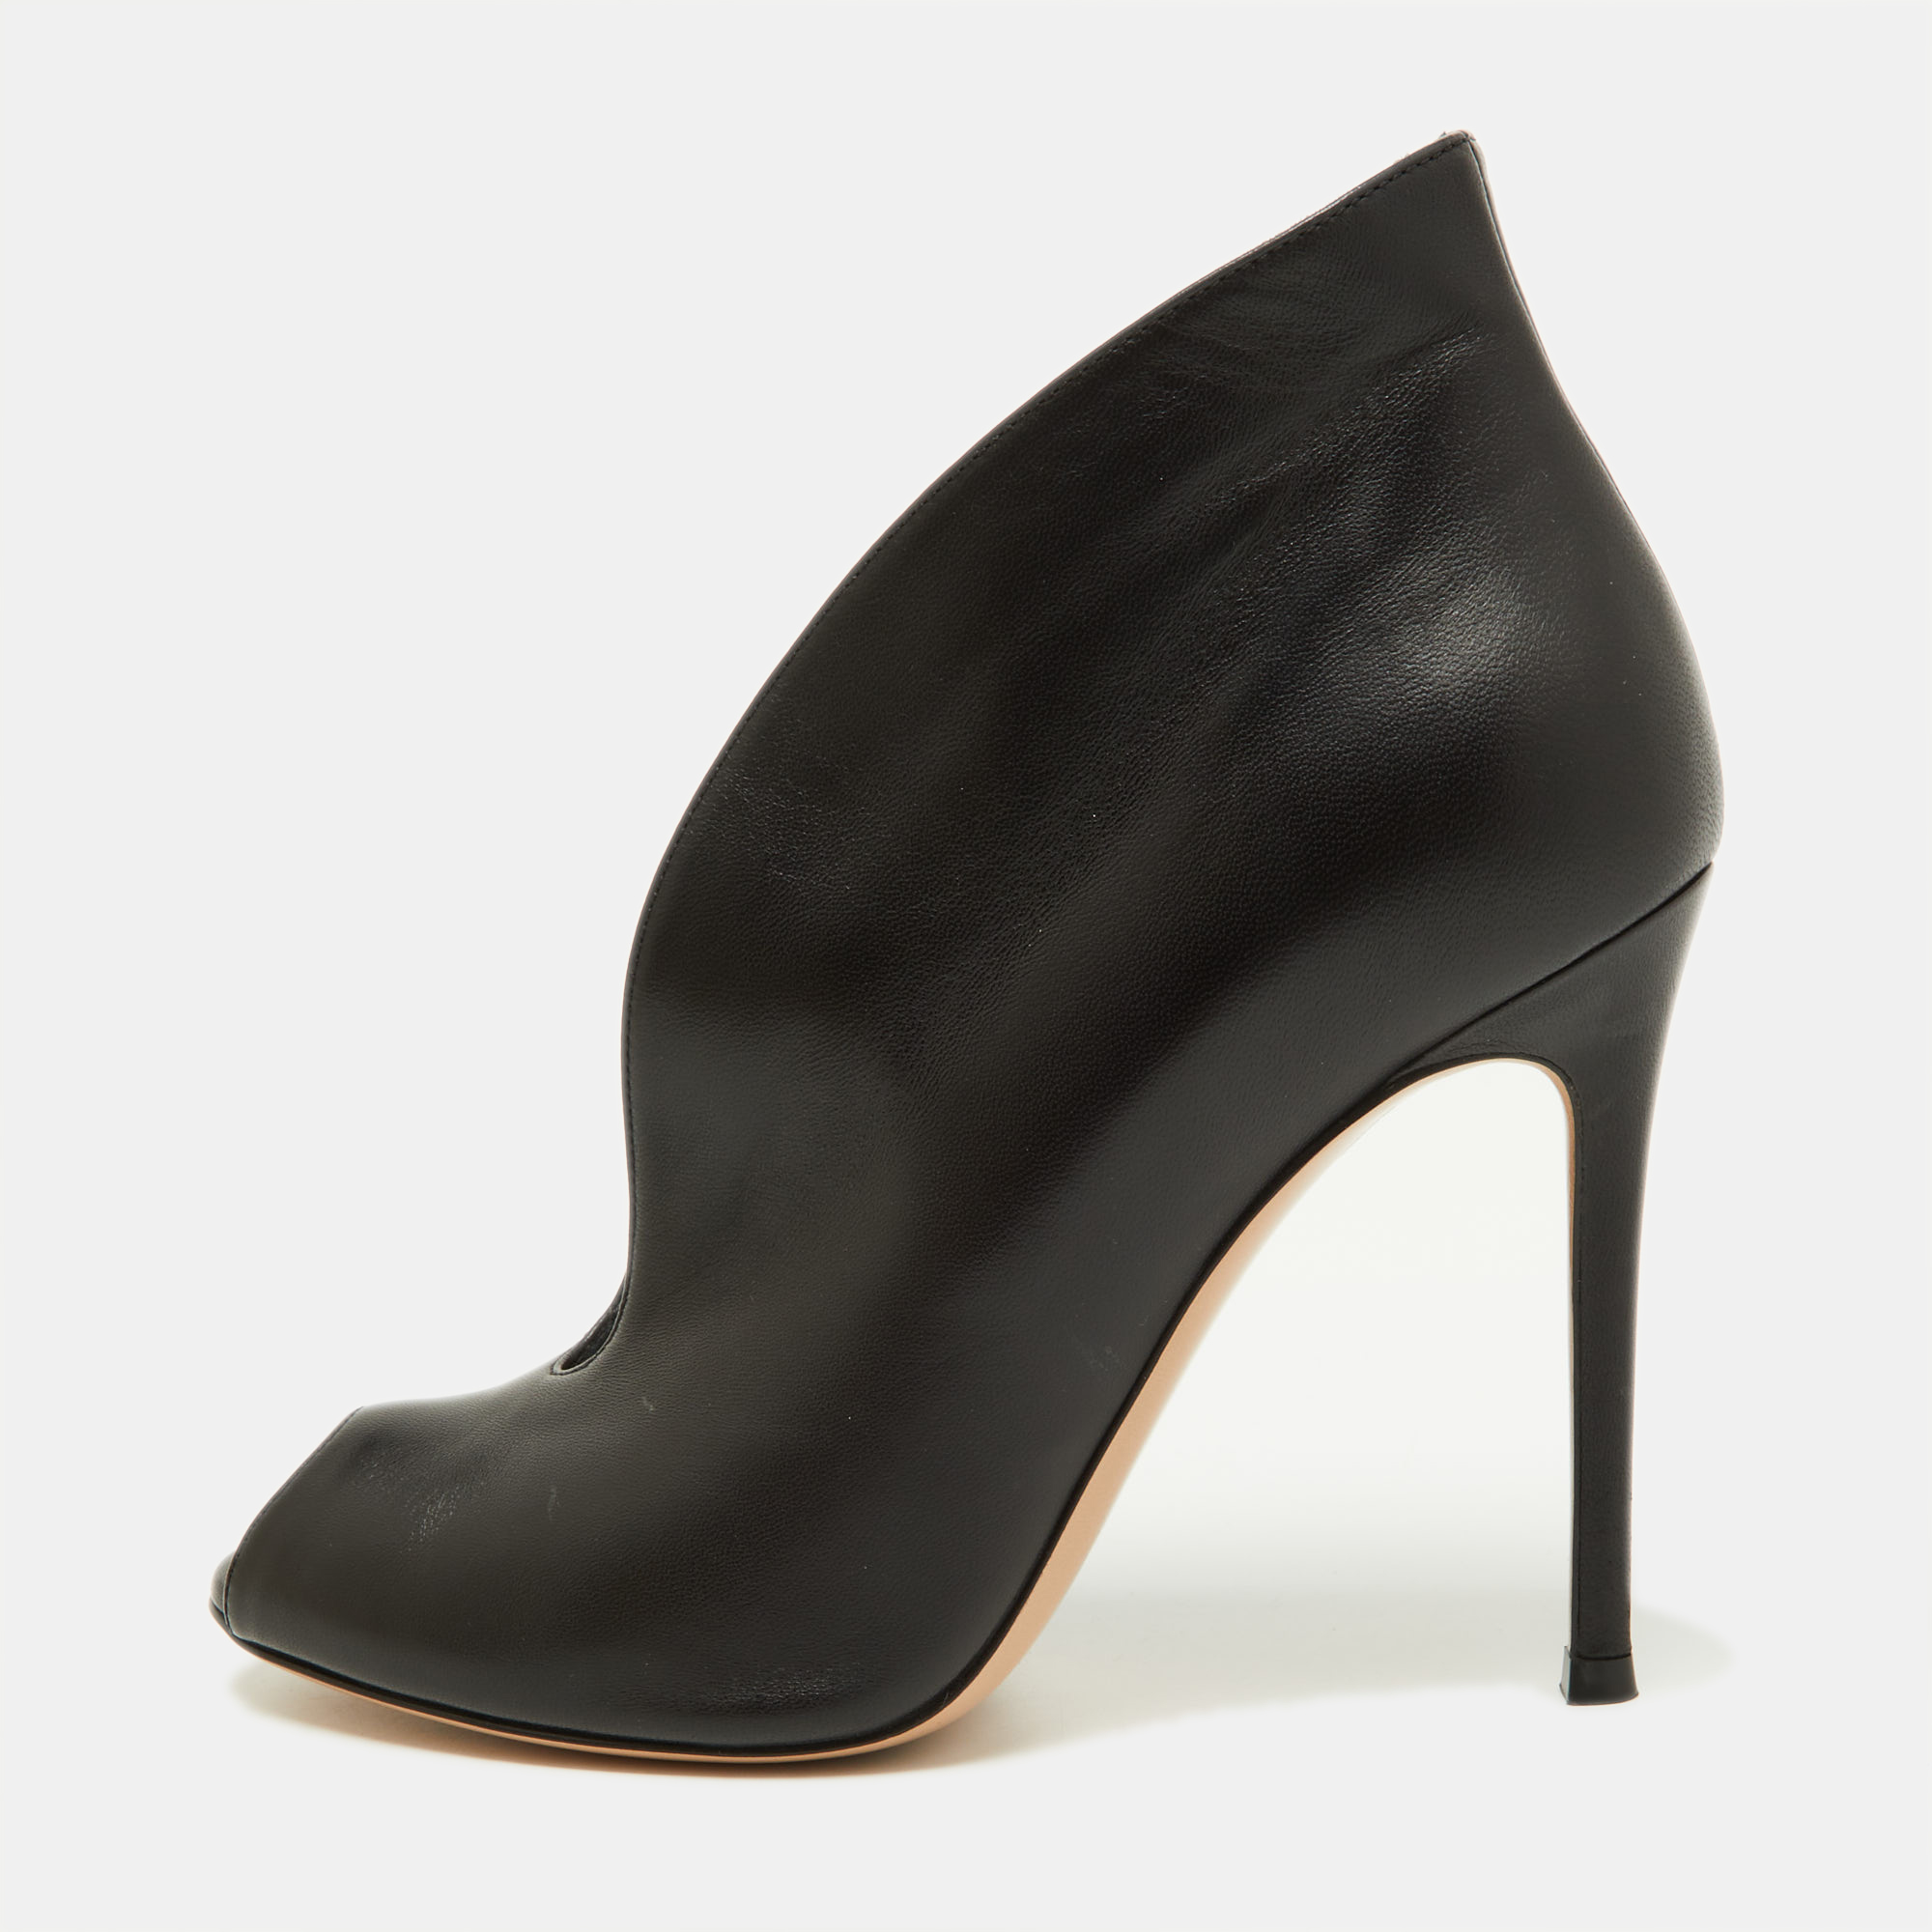 Pre-Owned Designer Shoes for Women - FARFETCH